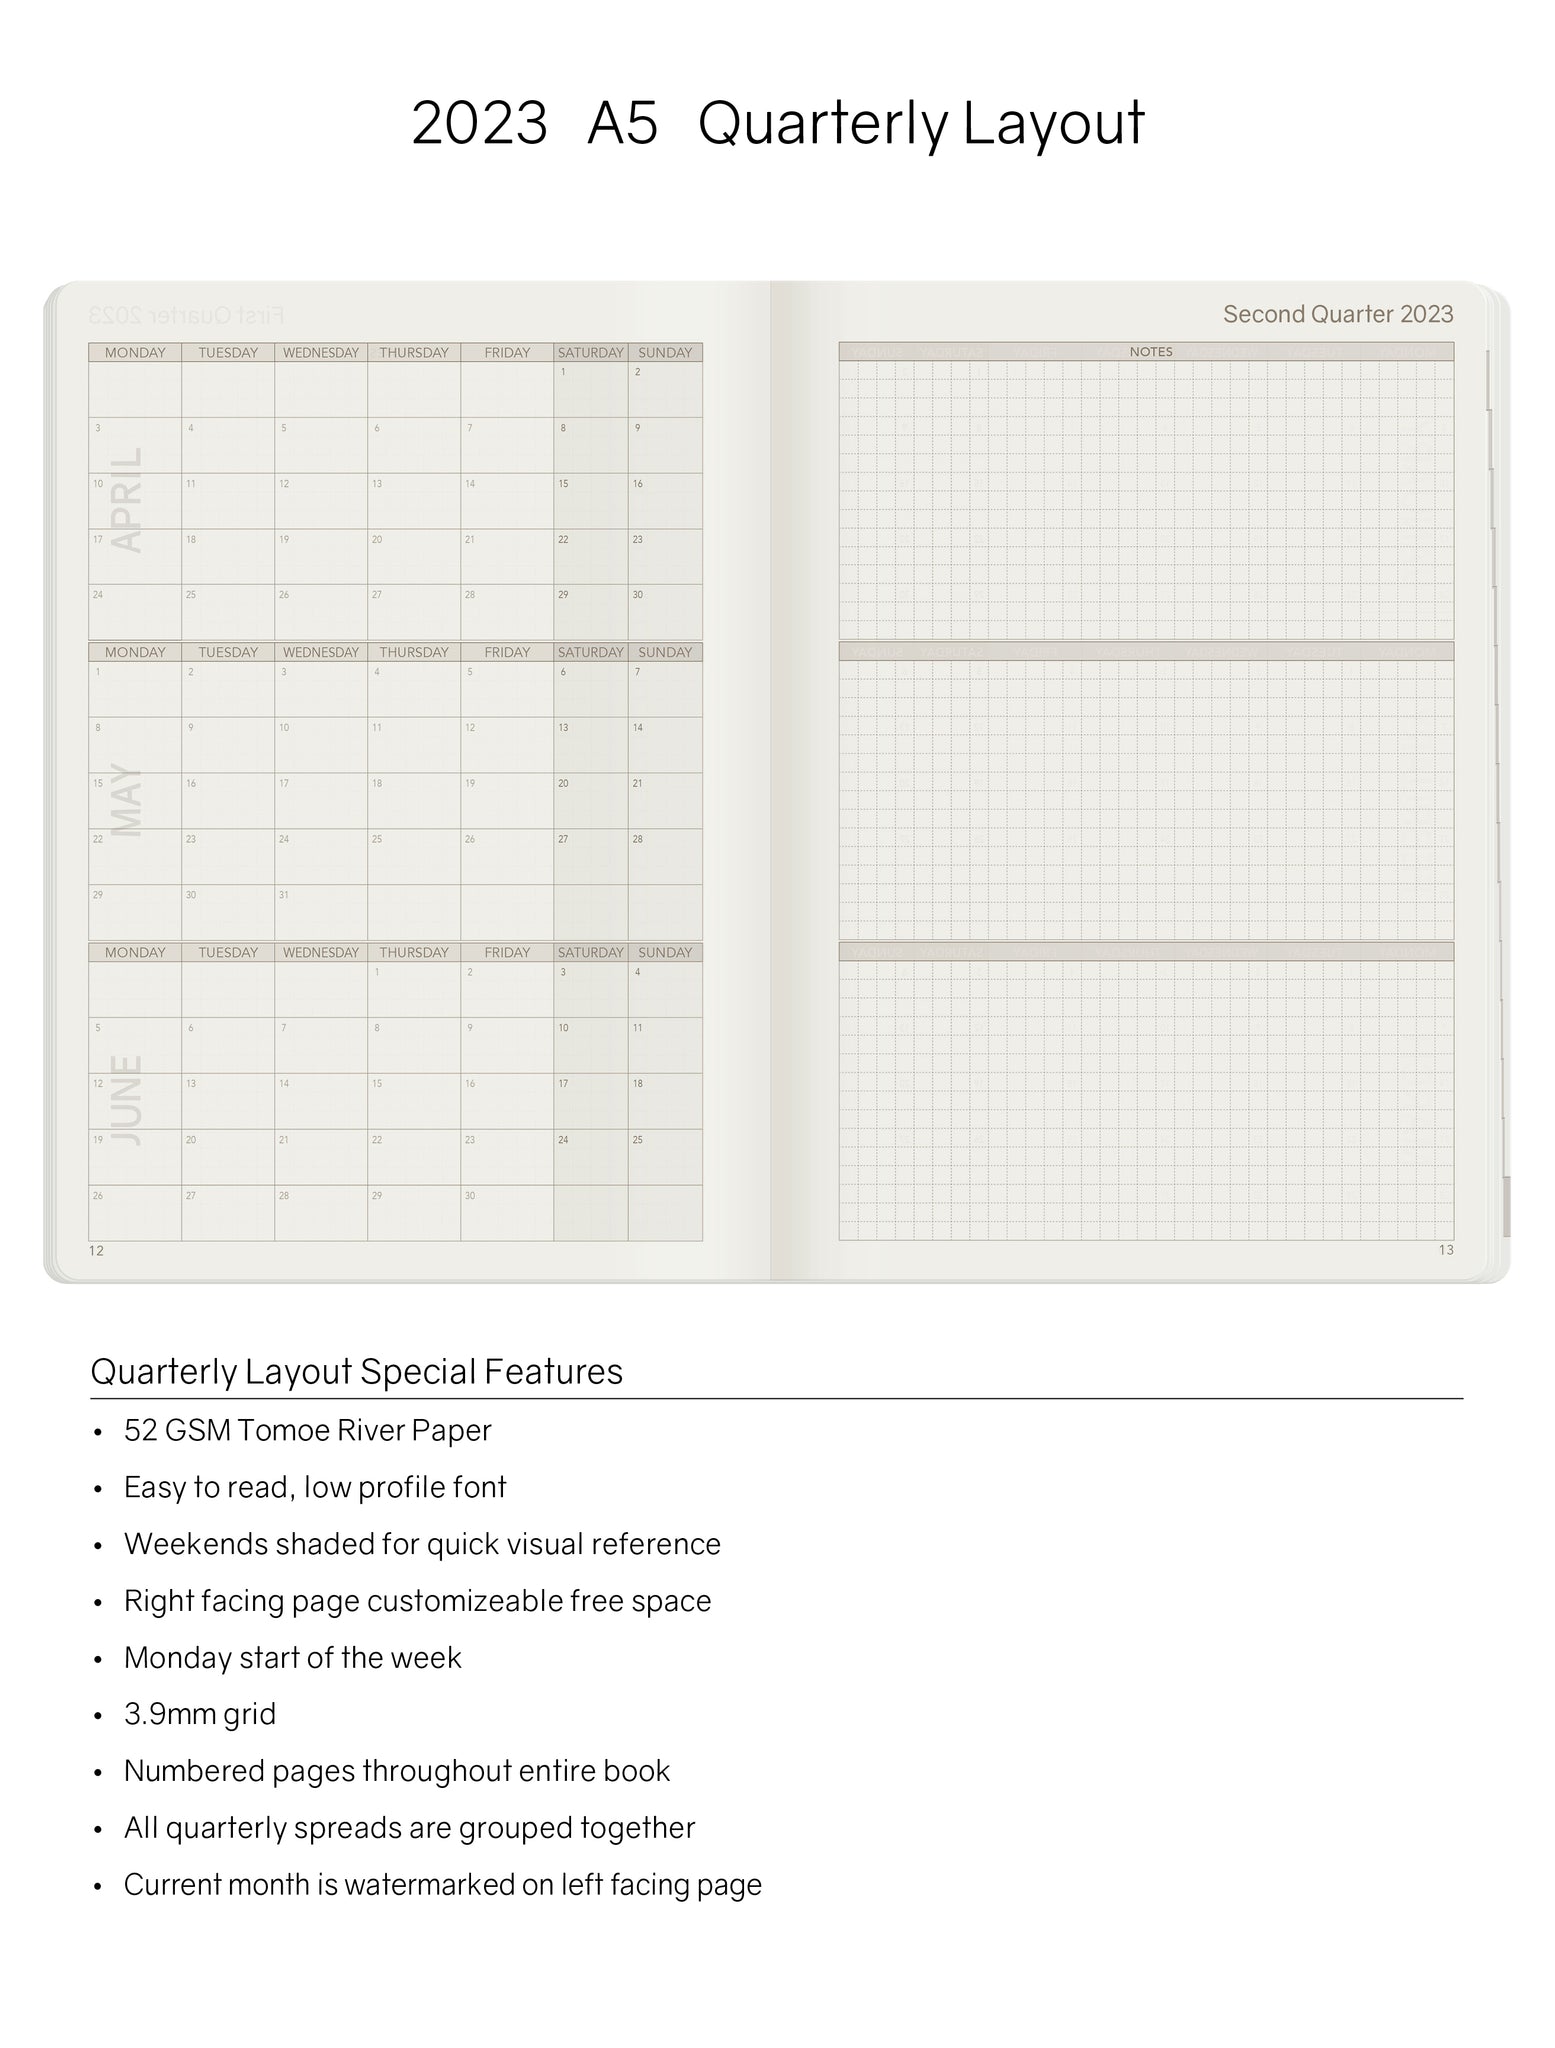 2023 A5 Weekly Planner - 52gsm Tomoe River Paper